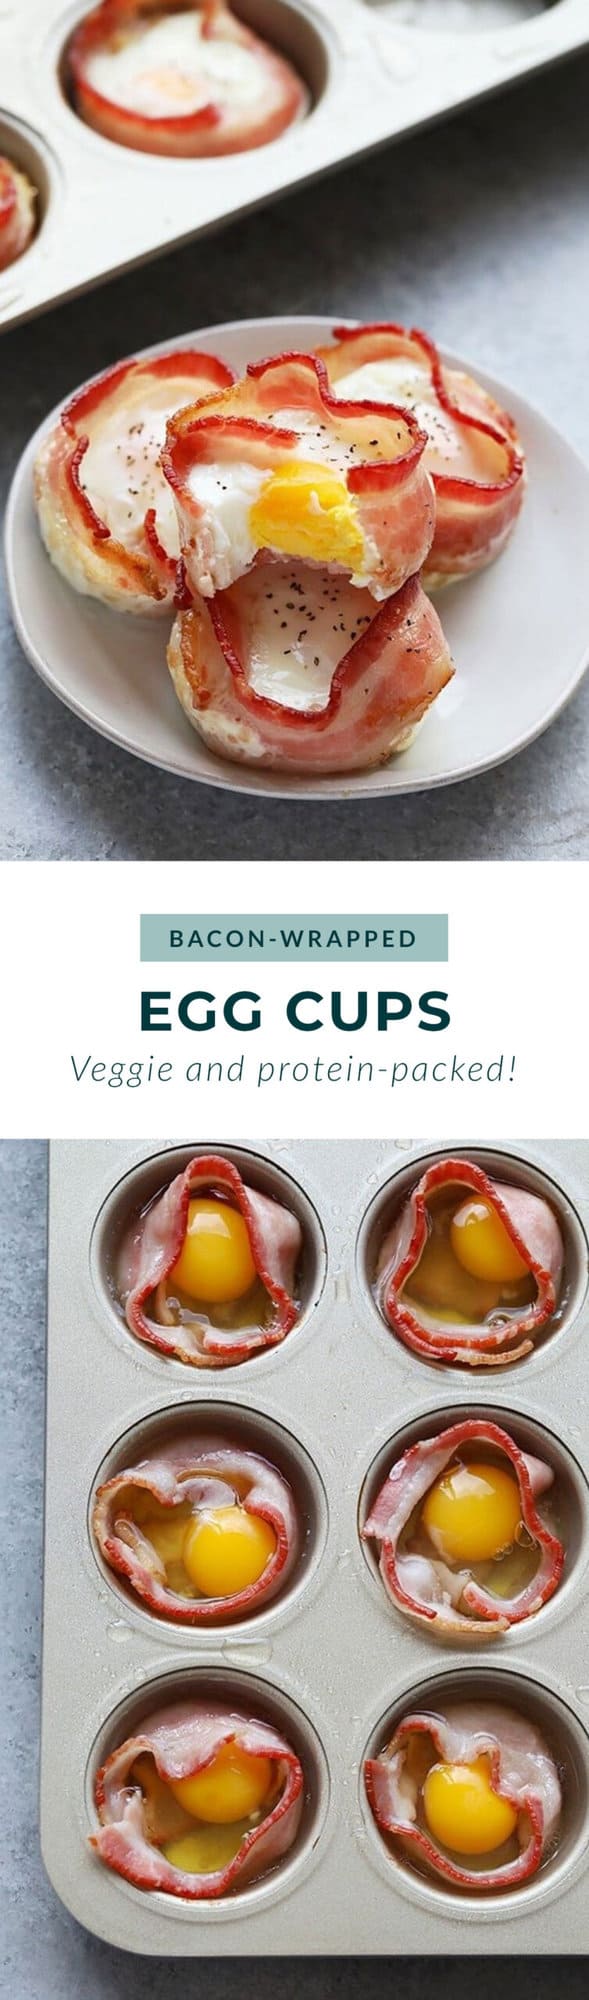 bacon wrapped egg cups on plate.